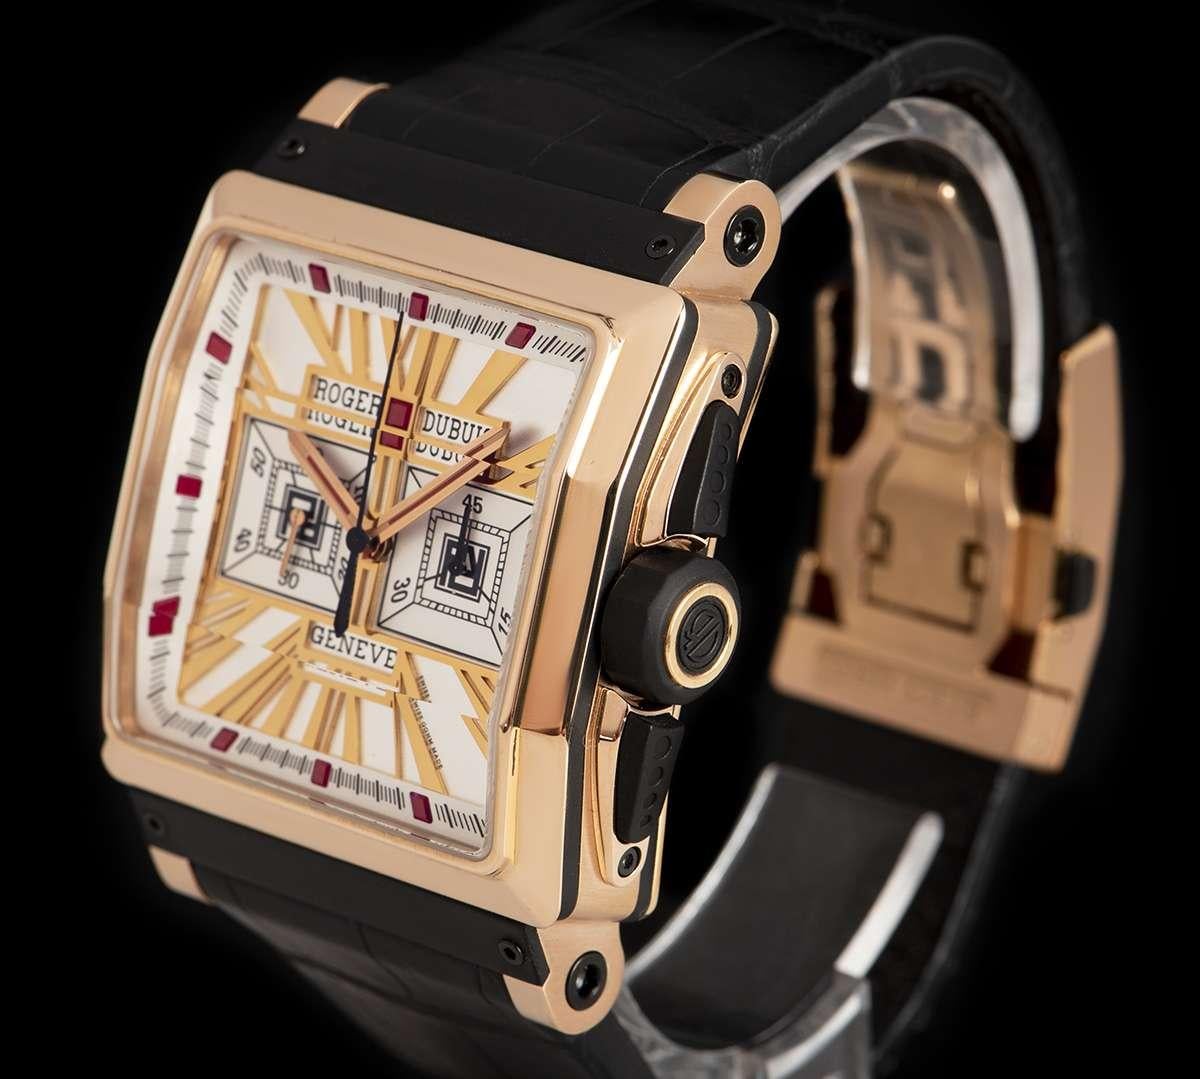 An 18k Rose Gold Limited Edition King Square Gents Wristwatch RDDBKS0031  silver dial with applied hour markers and applied roman numerals  II, V, VI, VII and XII, 45 minute recorder at 3 0'clock, small seconds at 9 0'clock, a fixed 18k rose gold